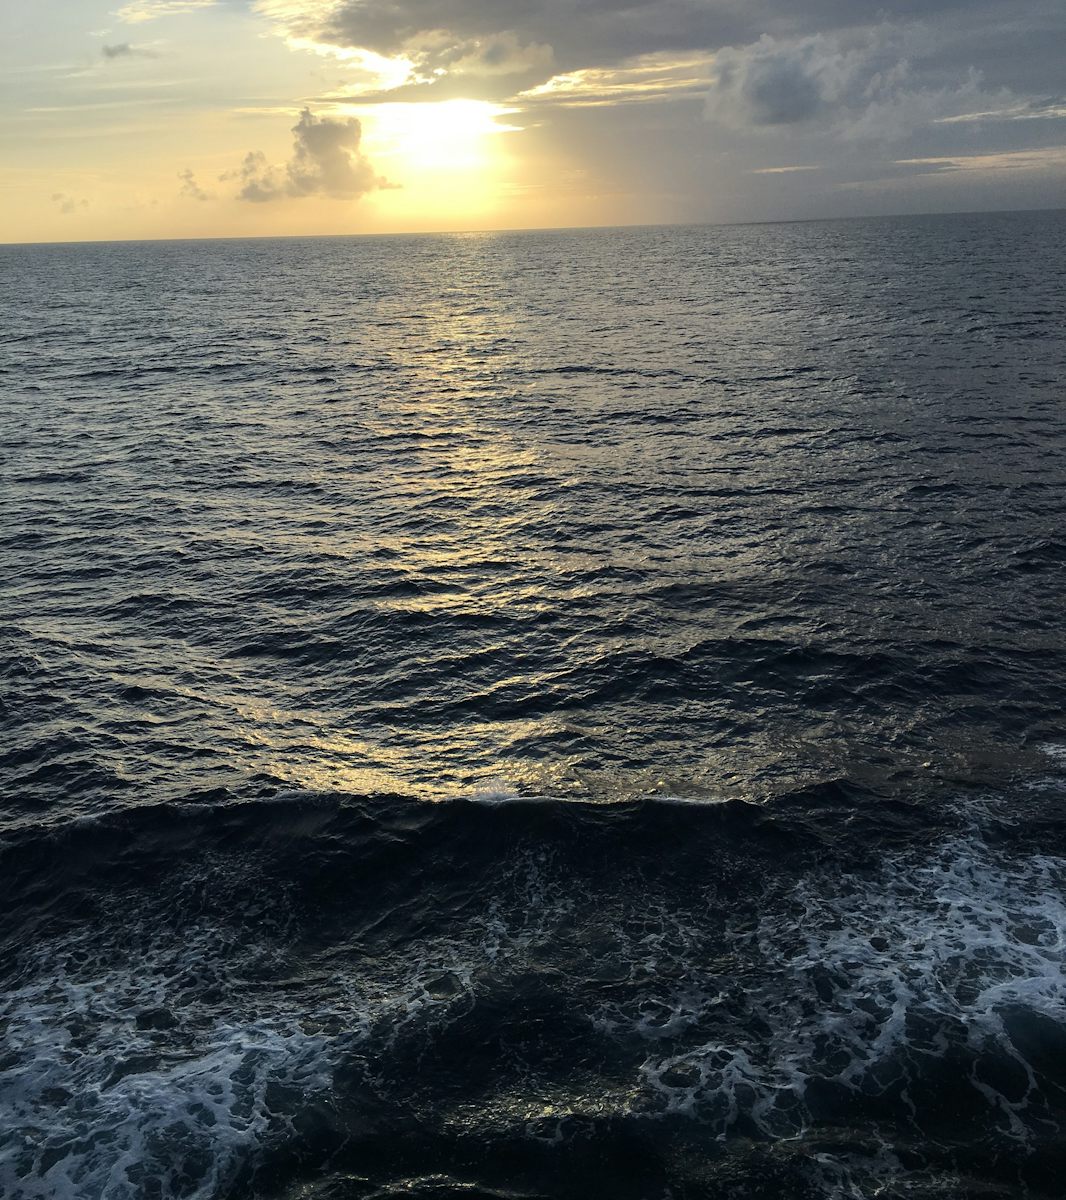 View from the cruise